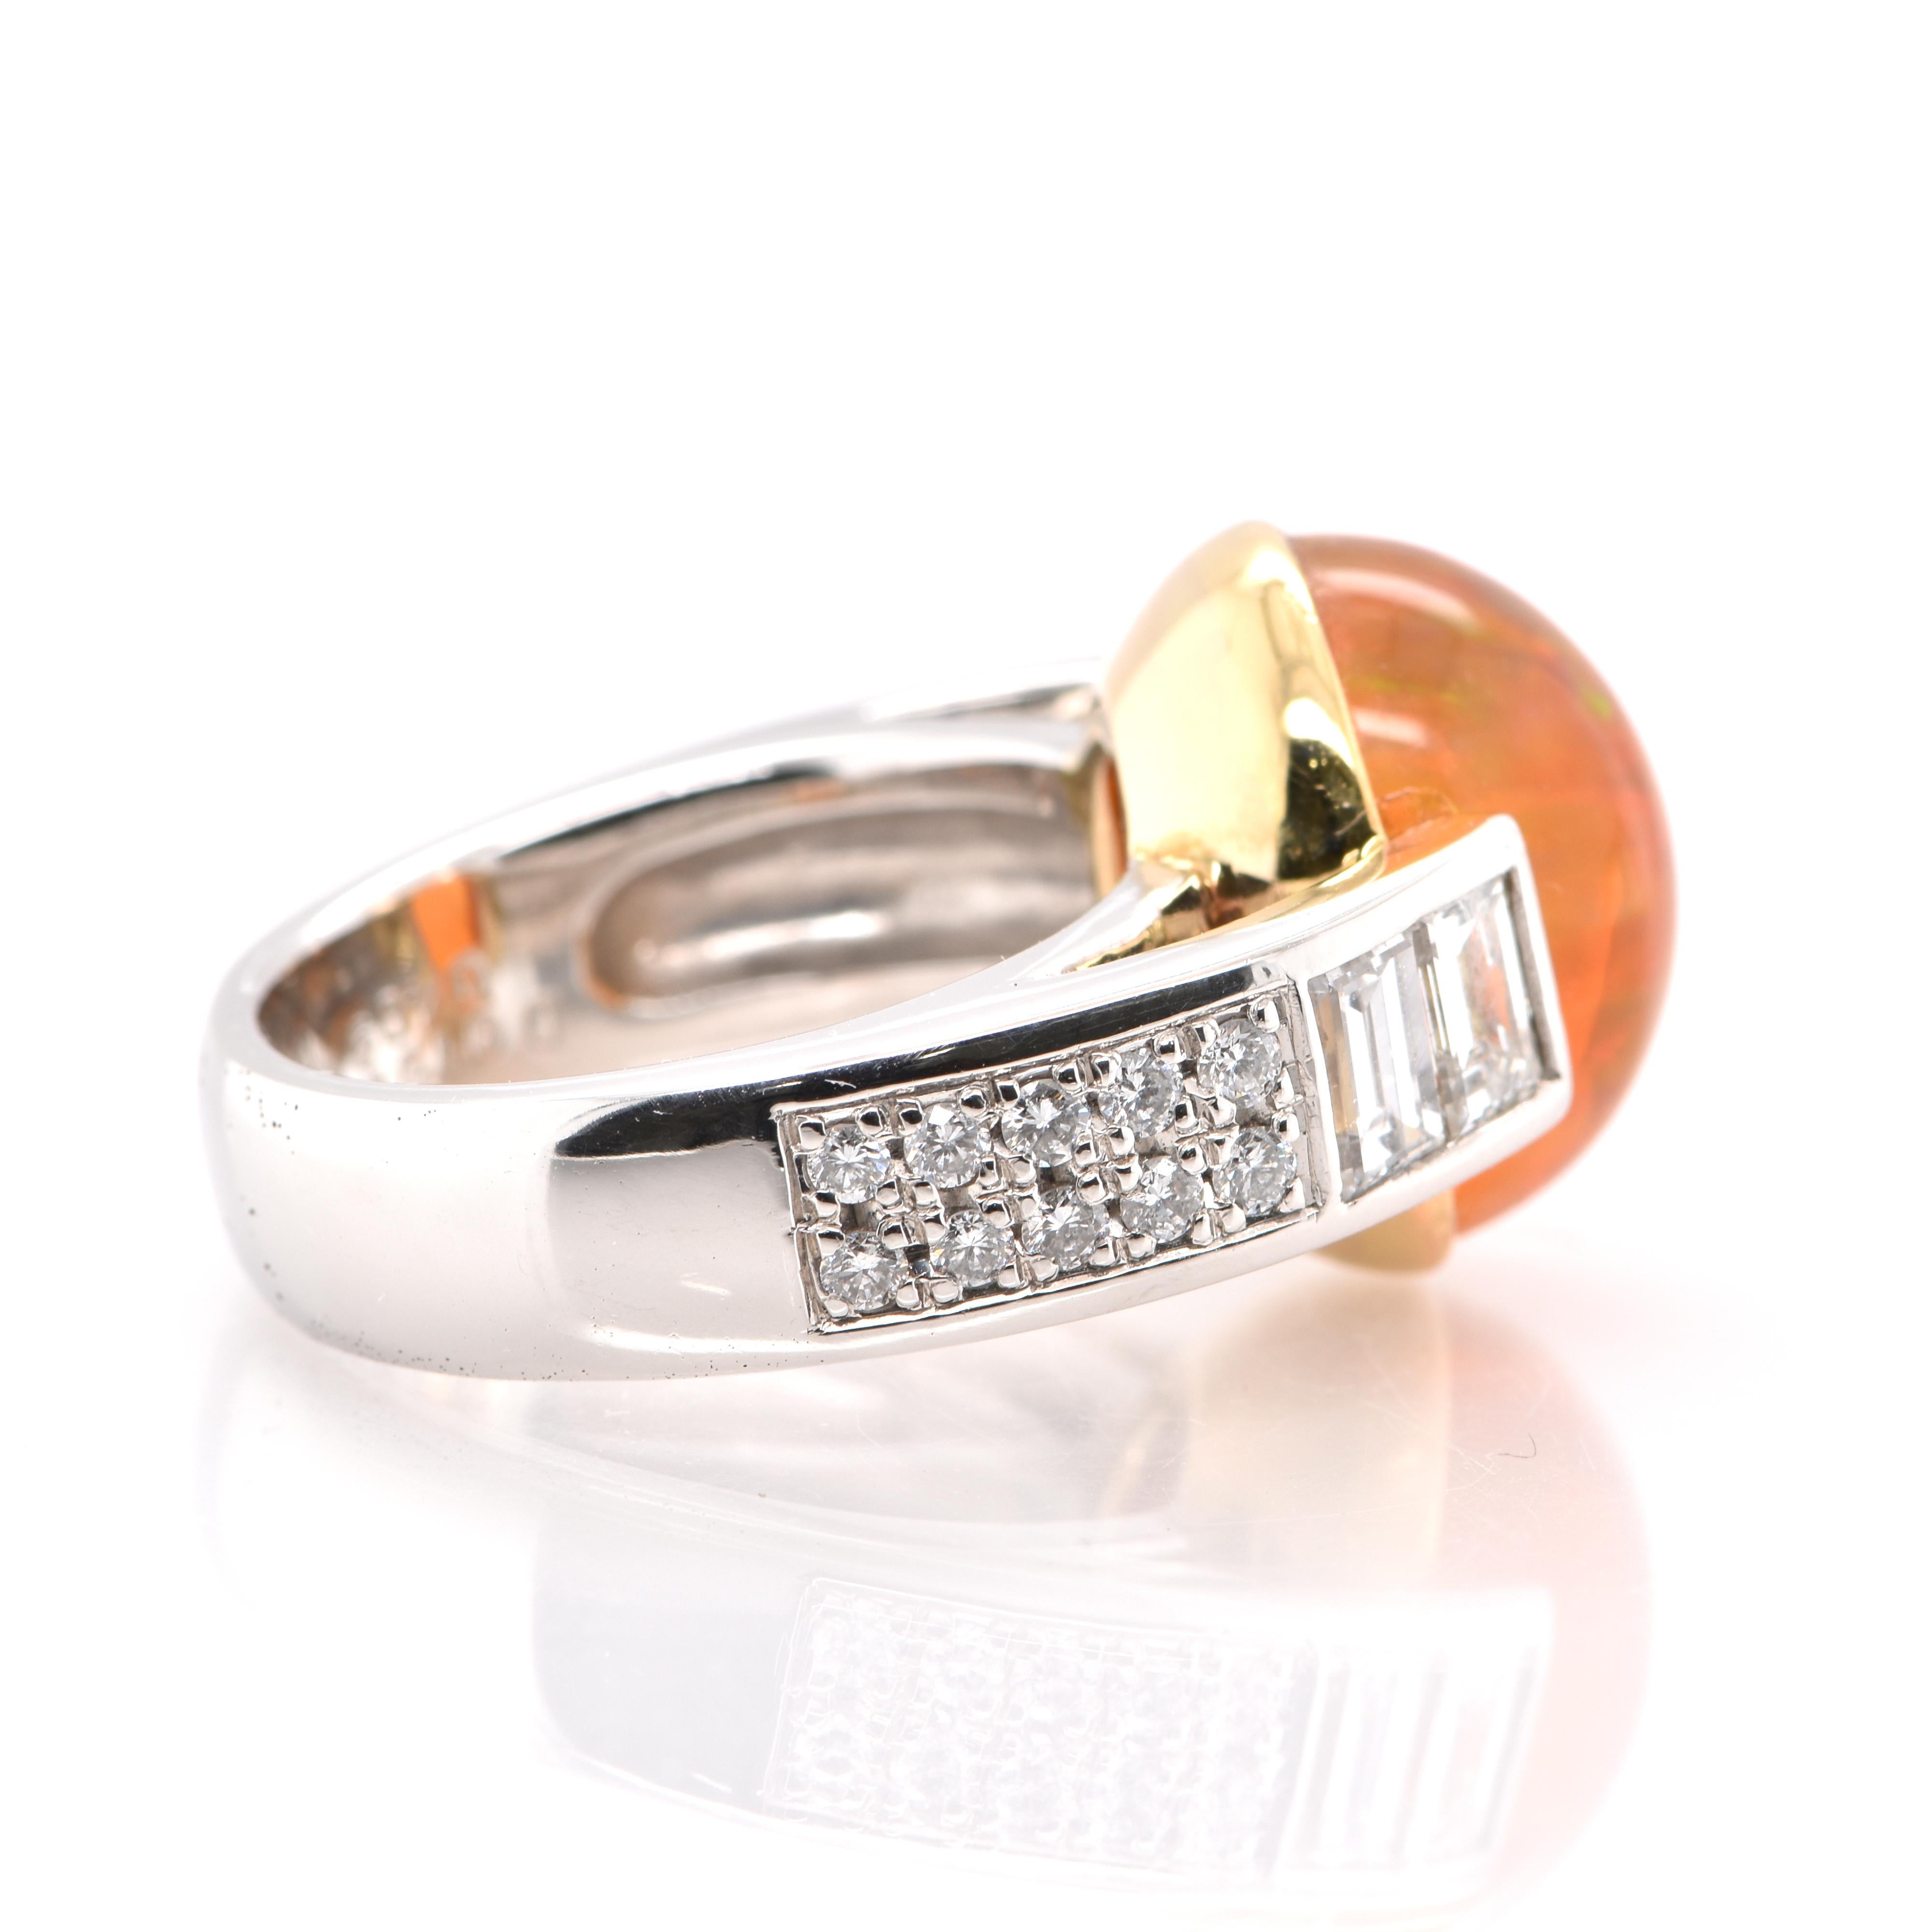 Modern 9.03 Carat, Natural Fire Opal and Diamond Cocktail Ring Set in Platinum and 18k